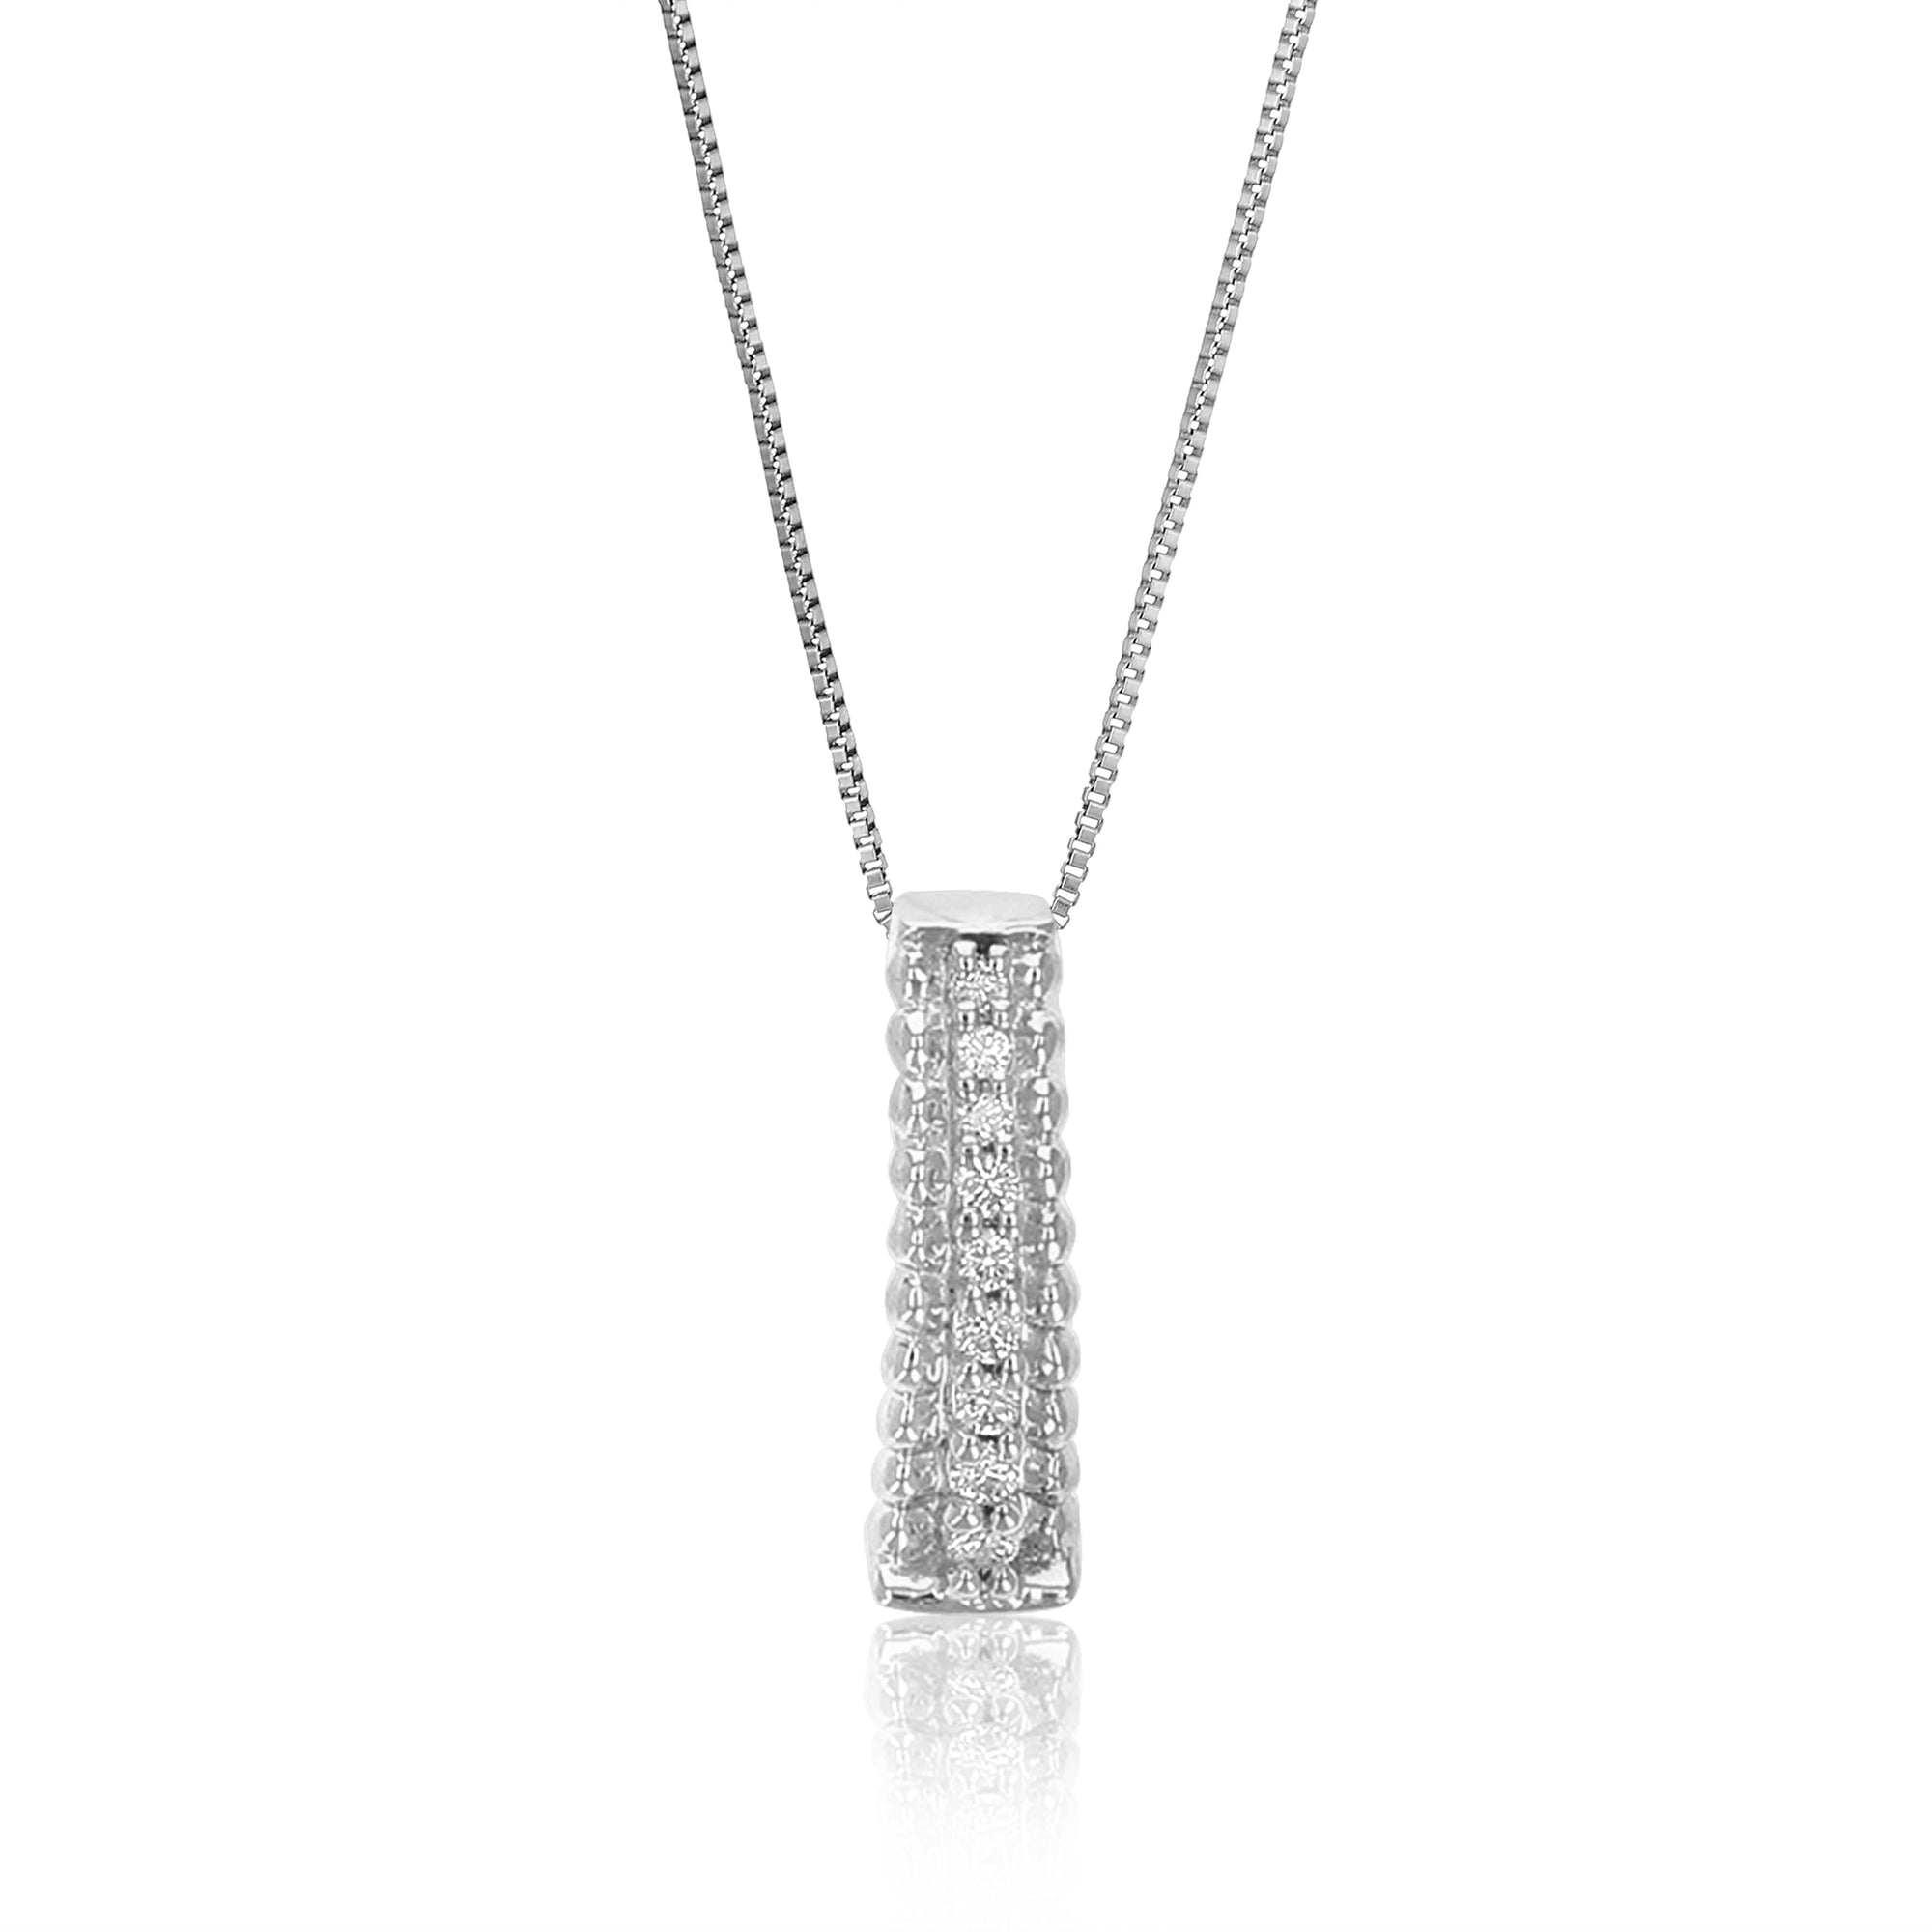 VIR JEWELS 1/20 cttw Diamond Pendant Necklace for Women | Lab Grown Diamond Drop Pendant Necklace in .925 Sterling Silver with Chain | Size 1/2 Inch